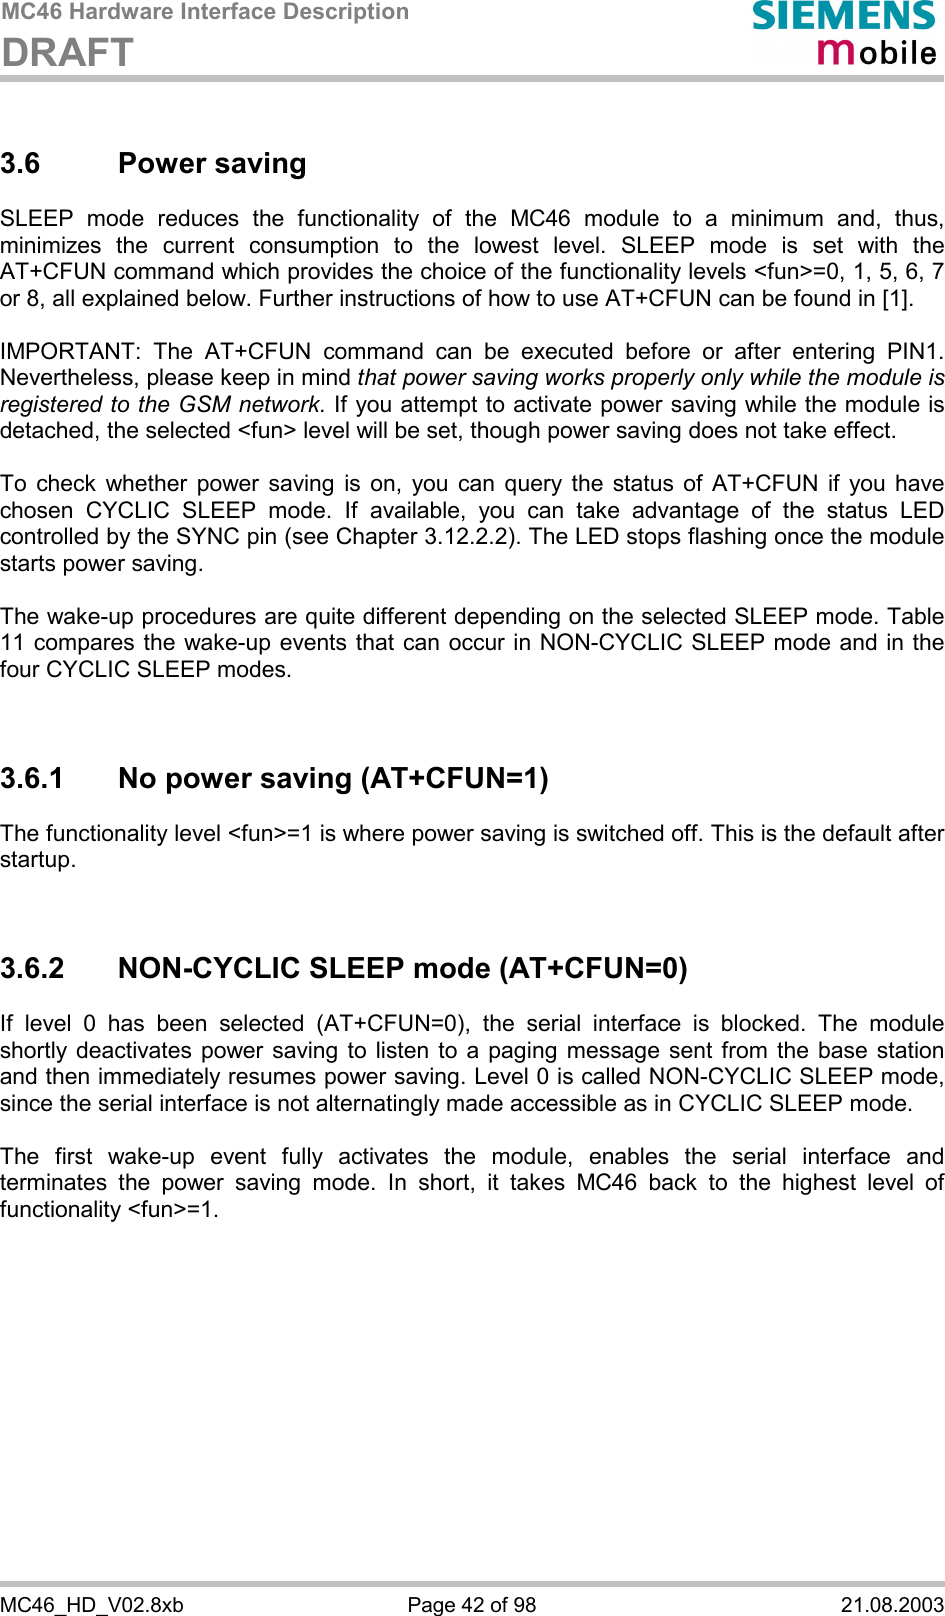 MC46 Hardware Interface Description DRAFT      MC46_HD_V02.8xb  Page 42 of 98  21.08.2003 3.6 Power saving SLEEP mode reduces the functionality of the MC46 module to a minimum and, thus, minimizes the current consumption to the lowest level. SLEEP mode is set with the AT+CFUN command which provides the choice of the functionality levels &lt;fun&gt;=0, 1, 5, 6, 7 or 8, all explained below. Further instructions of how to use AT+CFUN can be found in [1].  IMPORTANT: The AT+CFUN command can be executed before or after entering PIN1. Nevertheless, please keep in mind that power saving works properly only while the module is registered to the GSM network. If you attempt to activate power saving while the module is detached, the selected &lt;fun&gt; level will be set, though power saving does not take effect.  To check whether power saving is on, you can query the status of AT+CFUN if you have chosen CYCLIC SLEEP mode. If available, you can take advantage of the status LED controlled by the SYNC pin (see Chapter 3.12.2.2). The LED stops flashing once the module starts power saving.  The wake-up procedures are quite different depending on the selected SLEEP mode. Table 11 compares the wake-up events that can occur in NON-CYCLIC SLEEP mode and in the four CYCLIC SLEEP modes.   3.6.1  No power saving (AT+CFUN=1) The functionality level &lt;fun&gt;=1 is where power saving is switched off. This is the default after startup.    3.6.2  NON-CYCLIC SLEEP mode (AT+CFUN=0) If level 0 has been selected (AT+CFUN=0), the serial interface is blocked. The module shortly deactivates power saving to listen to a paging message sent from the base station and then immediately resumes power saving. Level 0 is called NON-CYCLIC SLEEP mode, since the serial interface is not alternatingly made accessible as in CYCLIC SLEEP mode.  The first wake-up event fully activates the module, enables the serial interface and terminates the power saving mode. In short, it takes MC46 back to the highest level of functionality &lt;fun&gt;=1.  